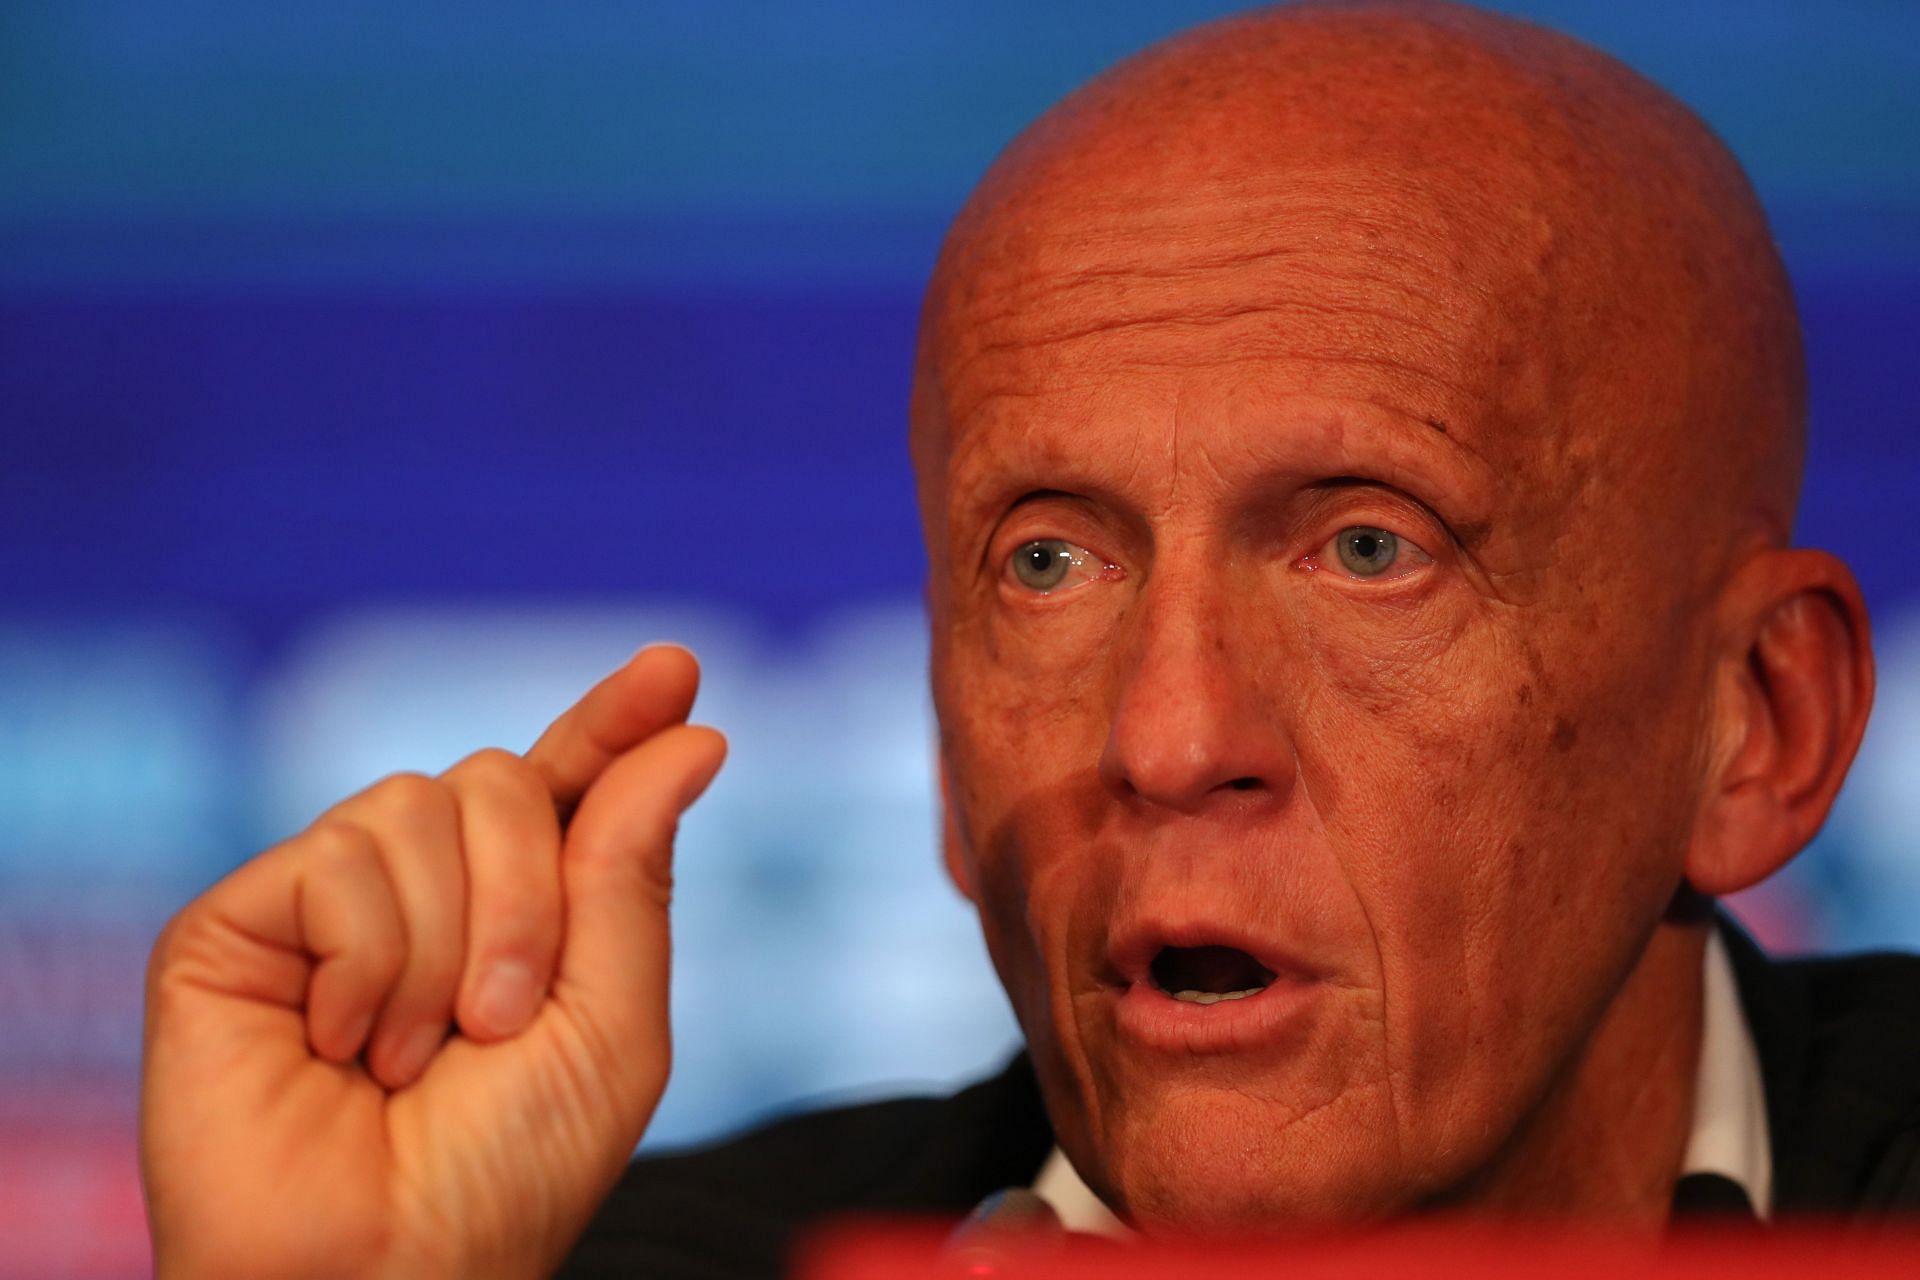 Pierluigi Collina, Chairman of FIFA referees committee, during a press conference on Referees Media Day at Luzhniki Stadium on June 12, 2018, in Moscow, Russia.